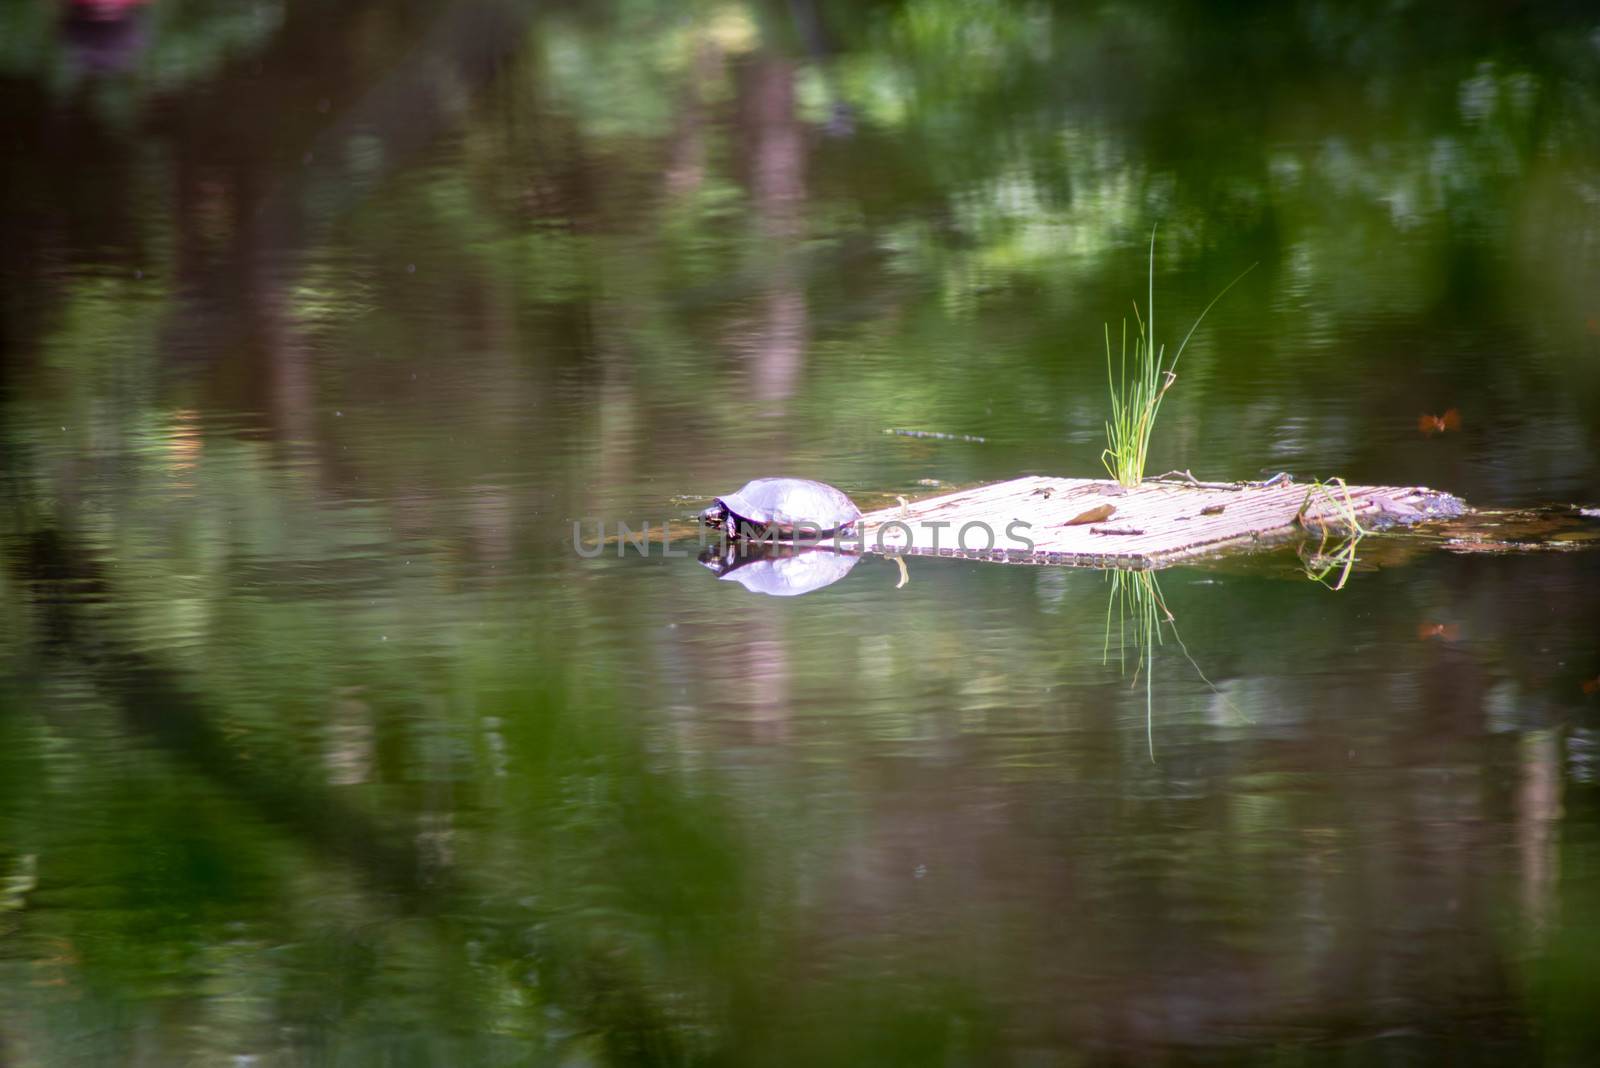 A turtle on a wooden raft sees his reflection in the surreal surface of a woodland pond. Green foliage reflected in the rippling motion of the water.